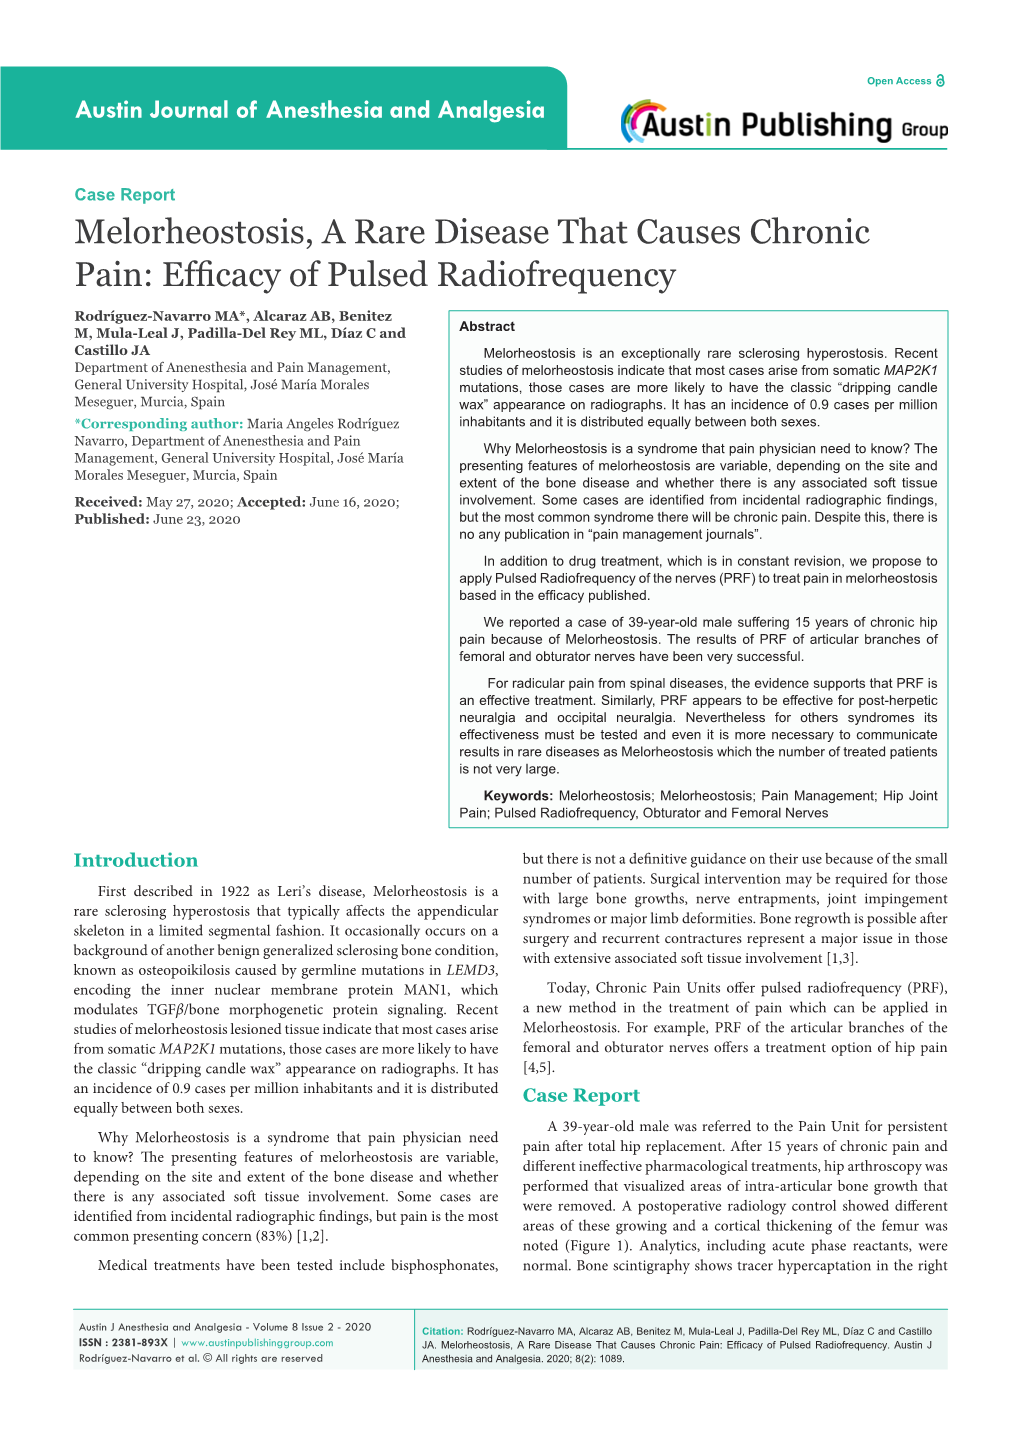 Melorheostosis, a Rare Disease That Causes Chronic Pain: Efficacy of Pulsed Radiofrequency